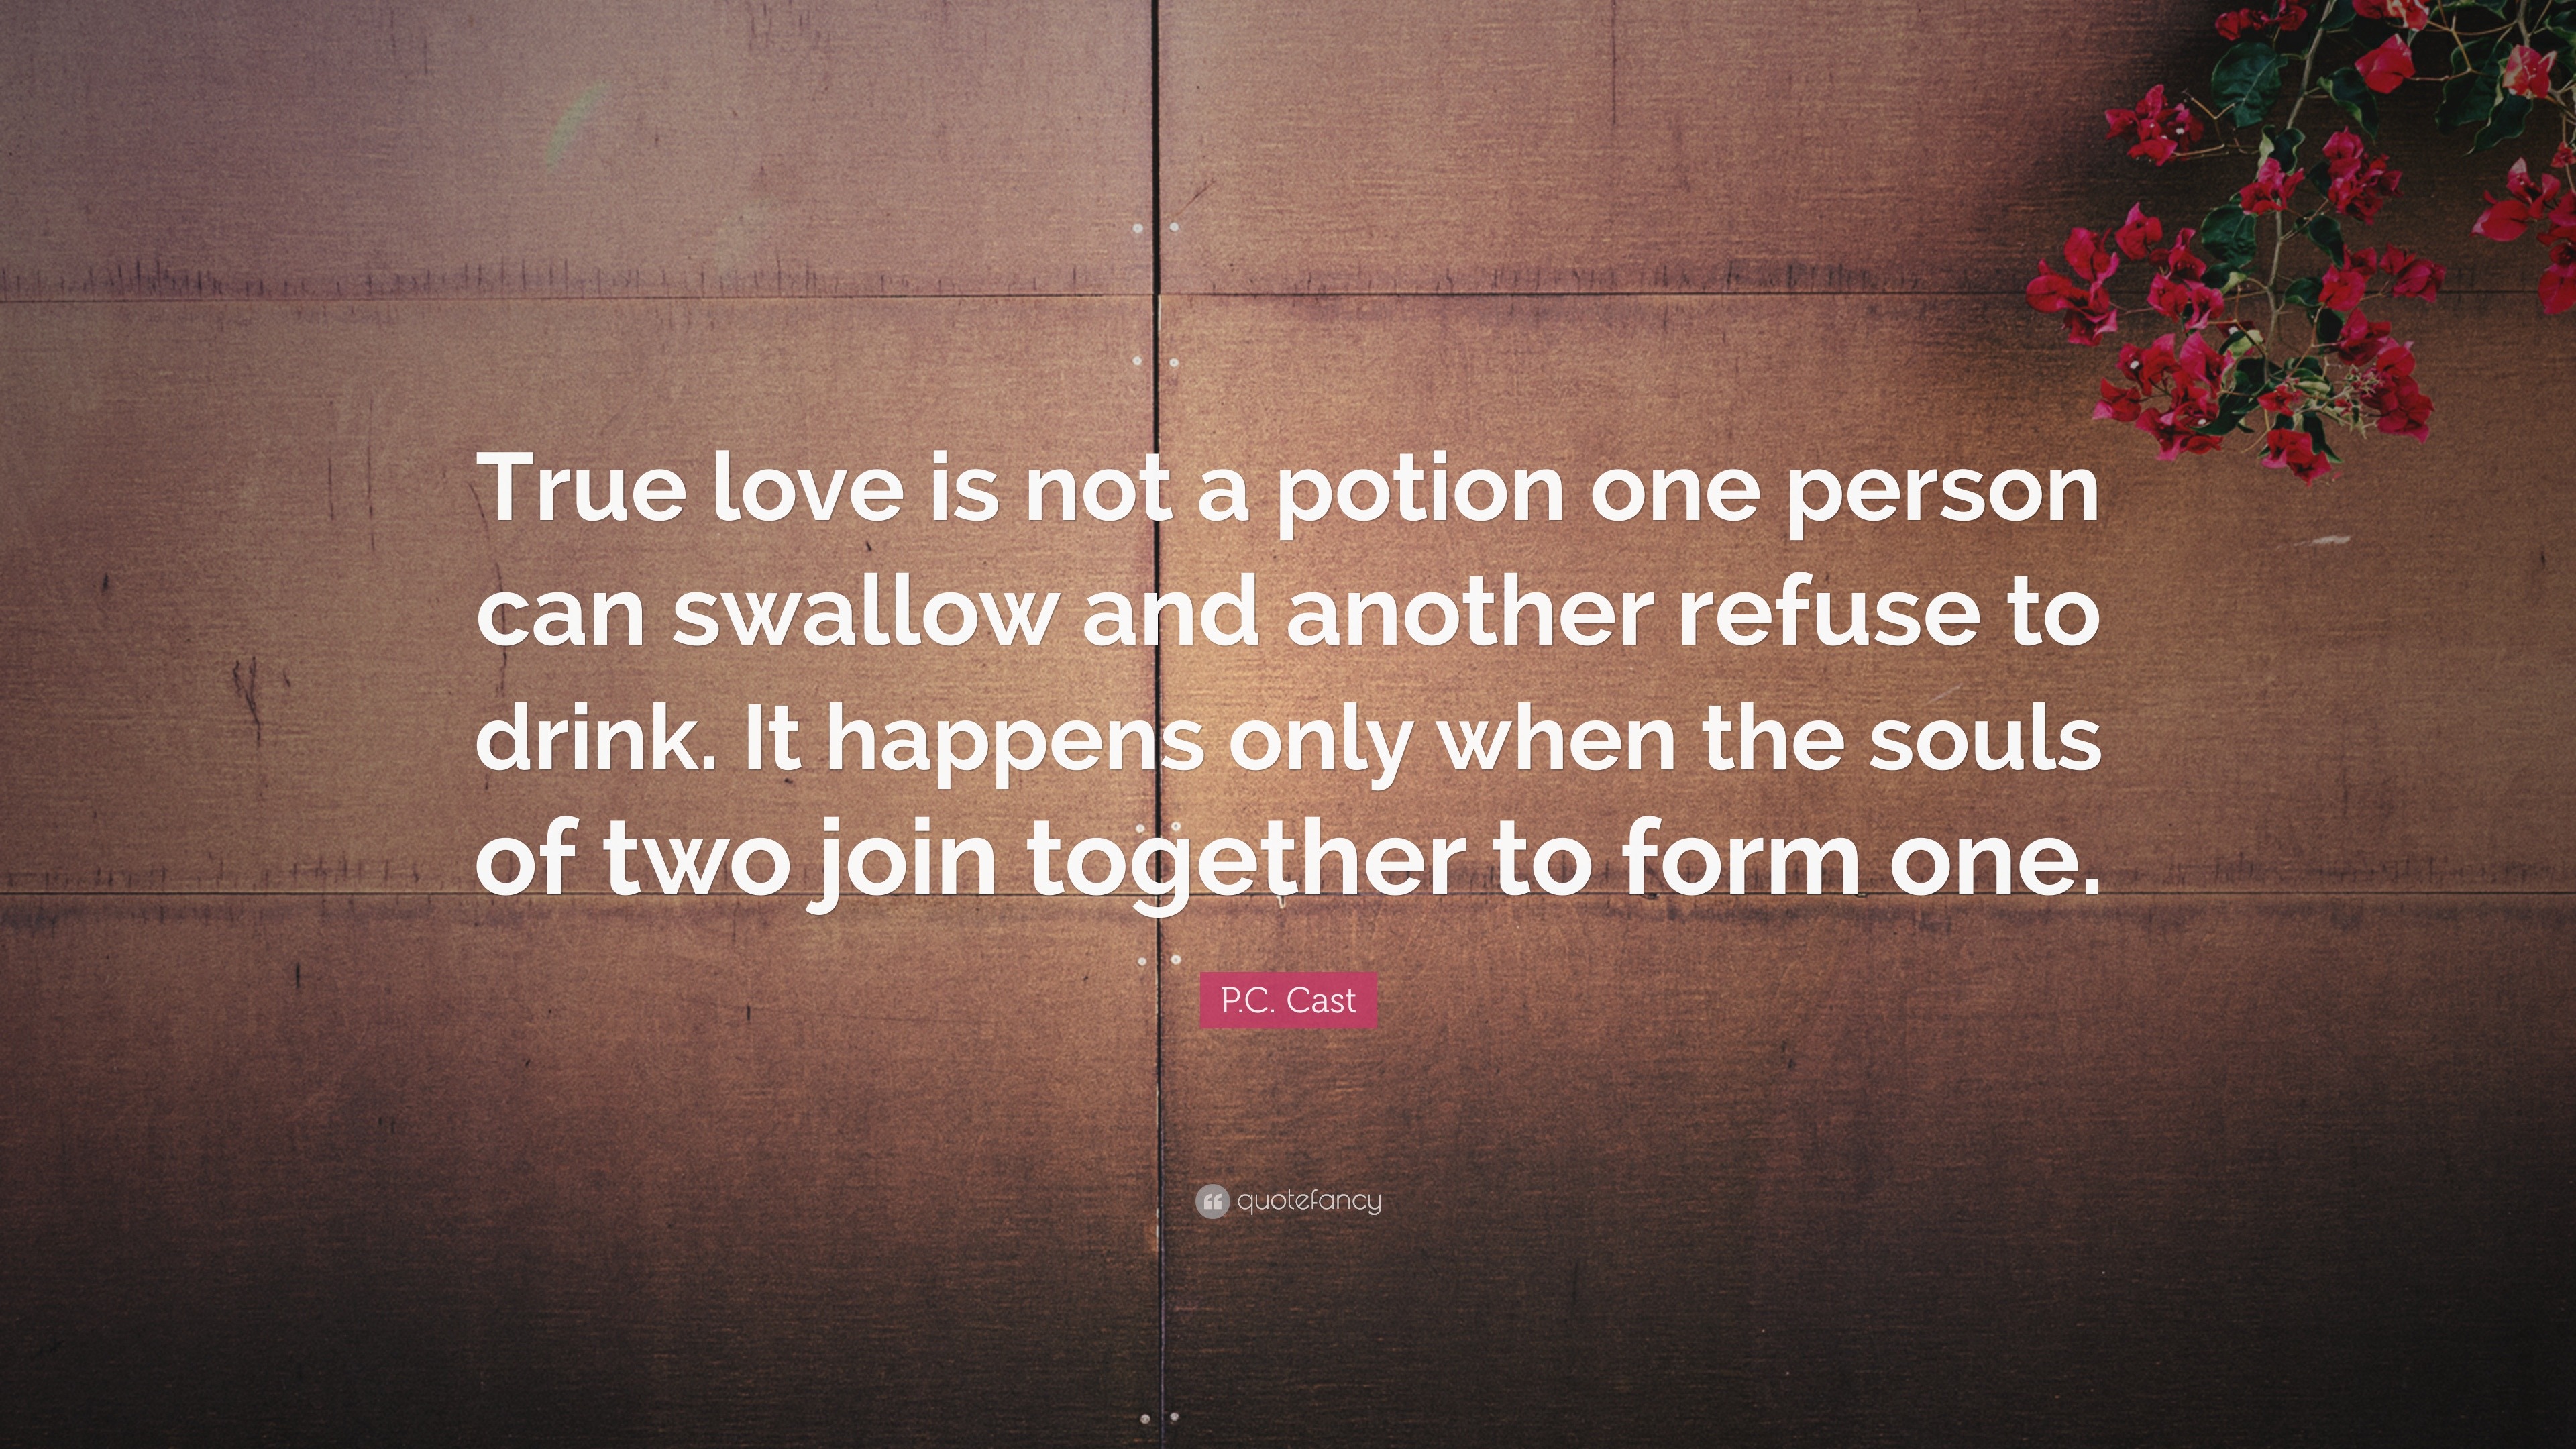 P.C. Cast Quote: “True love is not a potion one person can swallow and  another refuse to drink. It happens only when the souls of two join”